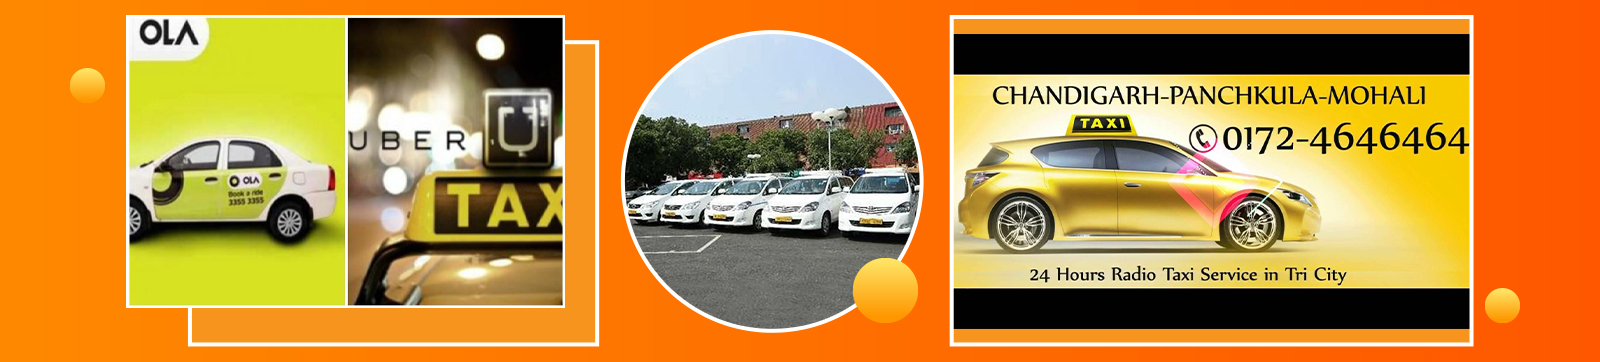 App-Based Cab Services to Get Better in Chandigarh, No Scope for Overcharging